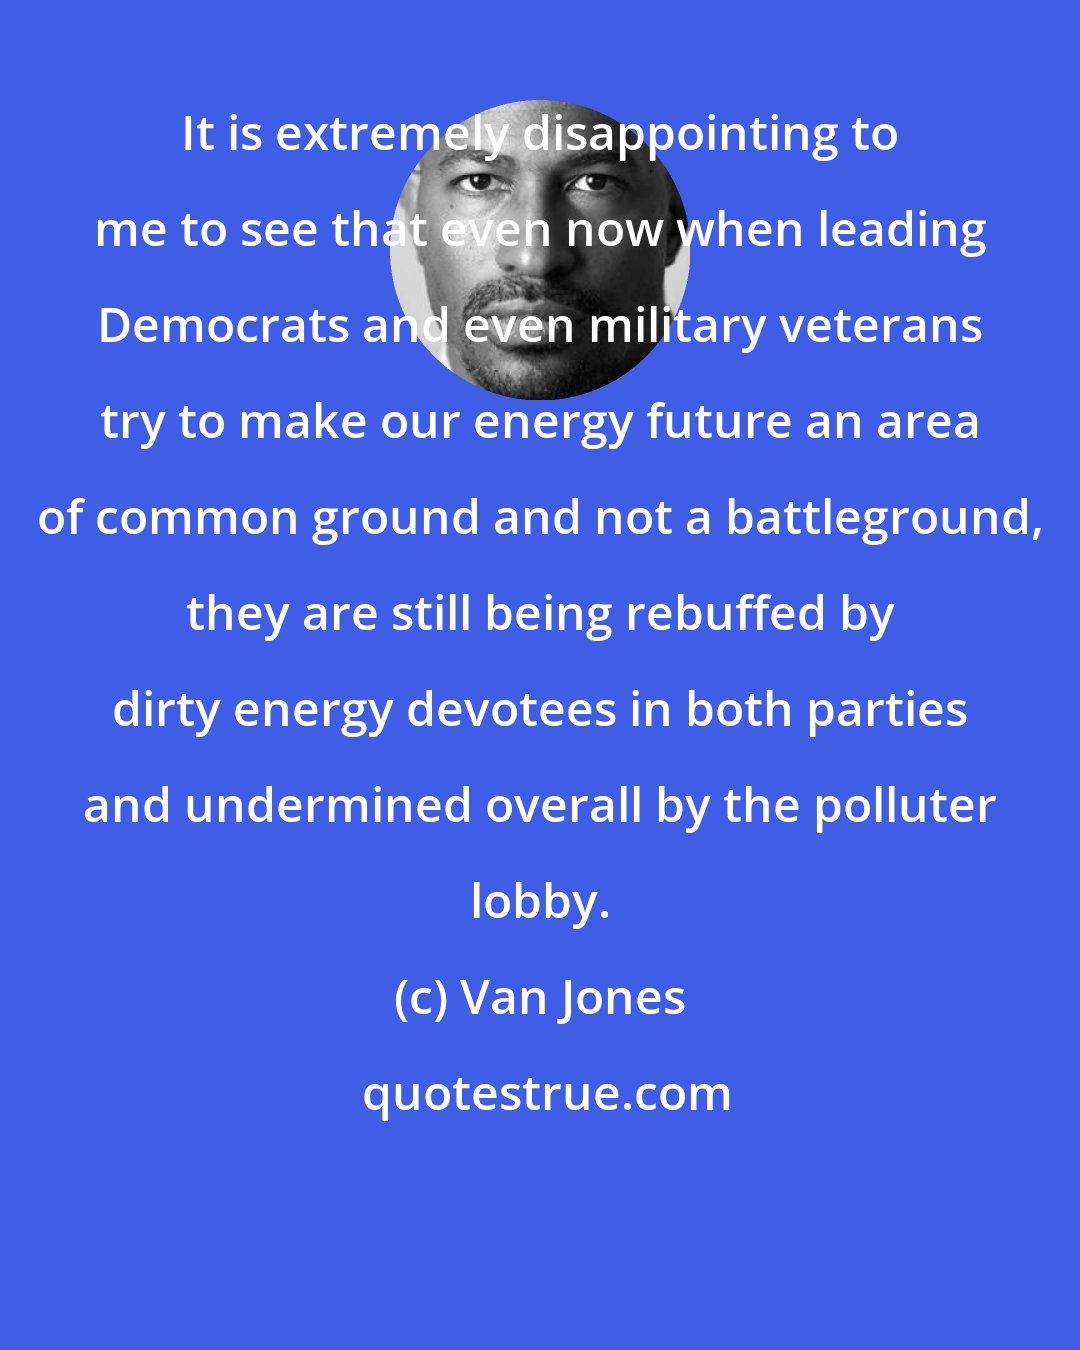 Van Jones: It is extremely disappointing to me to see that even now when leading Democrats and even military veterans try to make our energy future an area of common ground and not a battleground, they are still being rebuffed by dirty energy devotees in both parties and undermined overall by the polluter lobby.